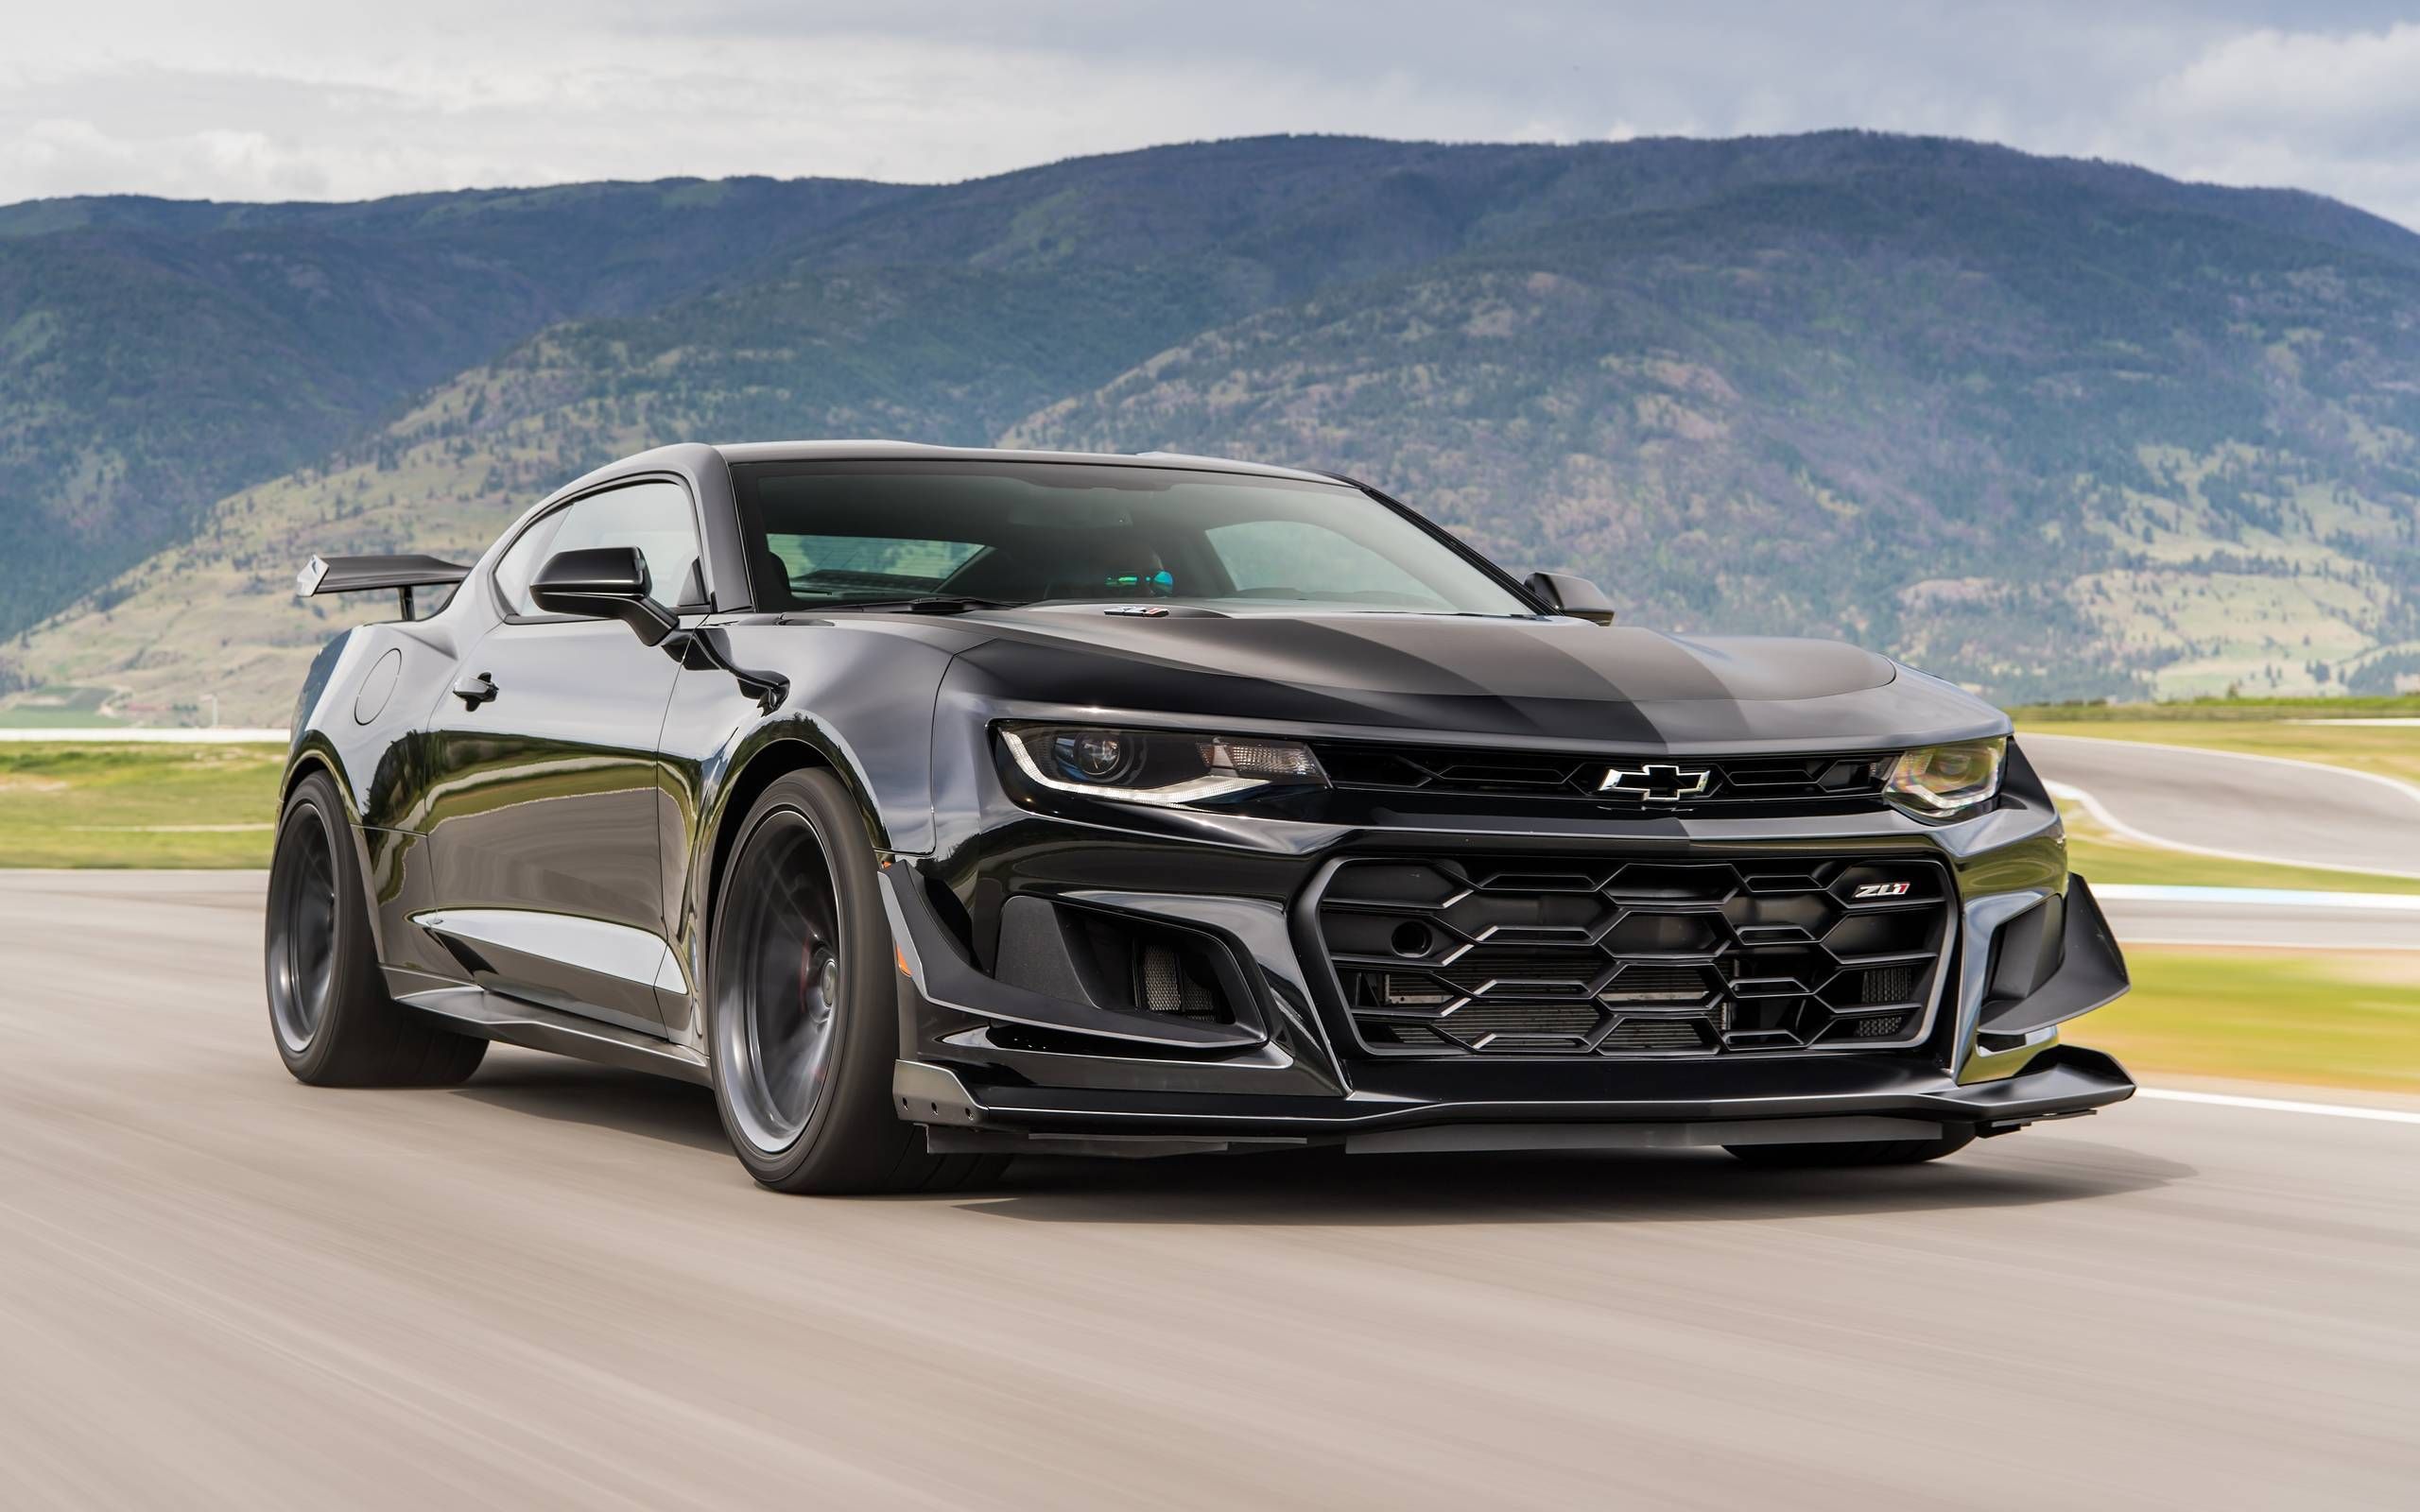 2018 Camaro ZL1 1LE first drive The ultimate trackready Camaro